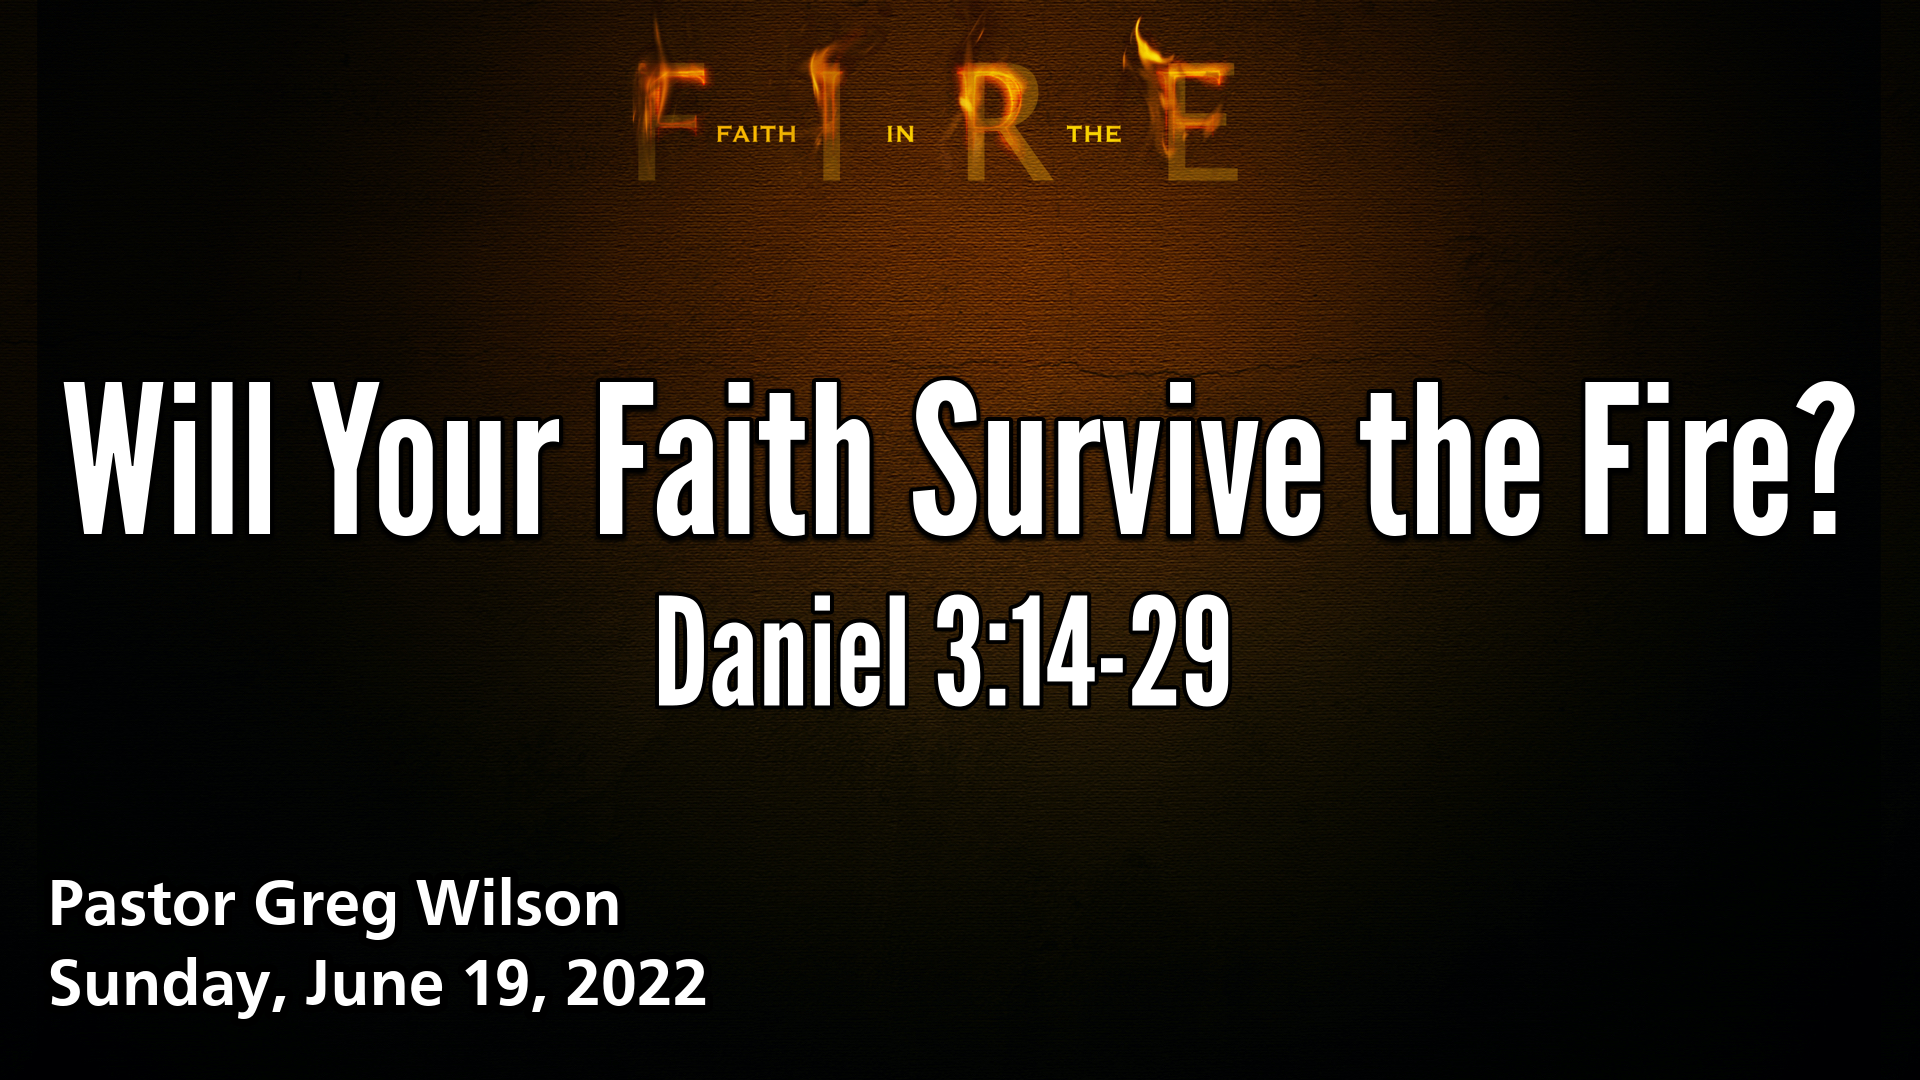 "Will Your Faith Survive the Fire?"